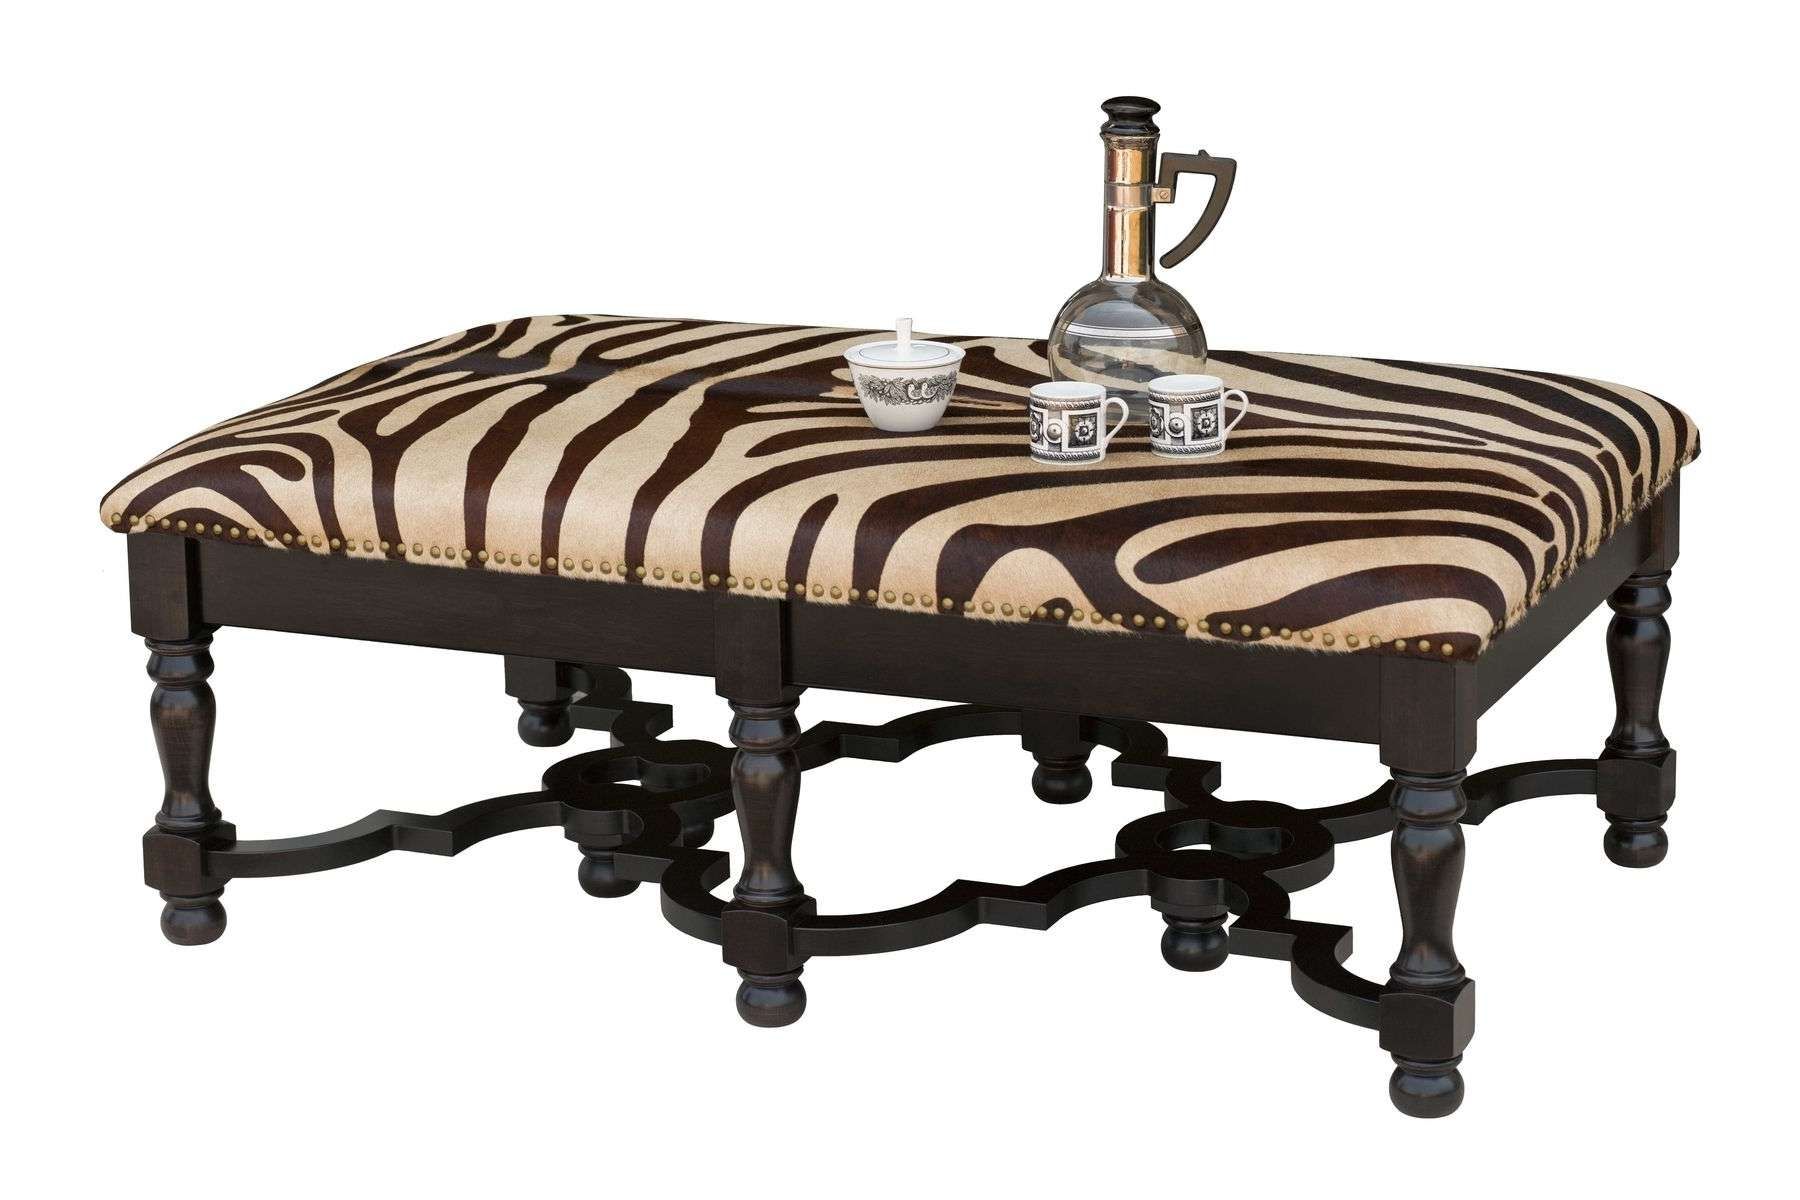 Hand Crafted Zebra Hide Ottoman Coffee Tablecorl Design Ltd For Fashionable Leopard Ottoman Coffee Tables (View 6 of 20)